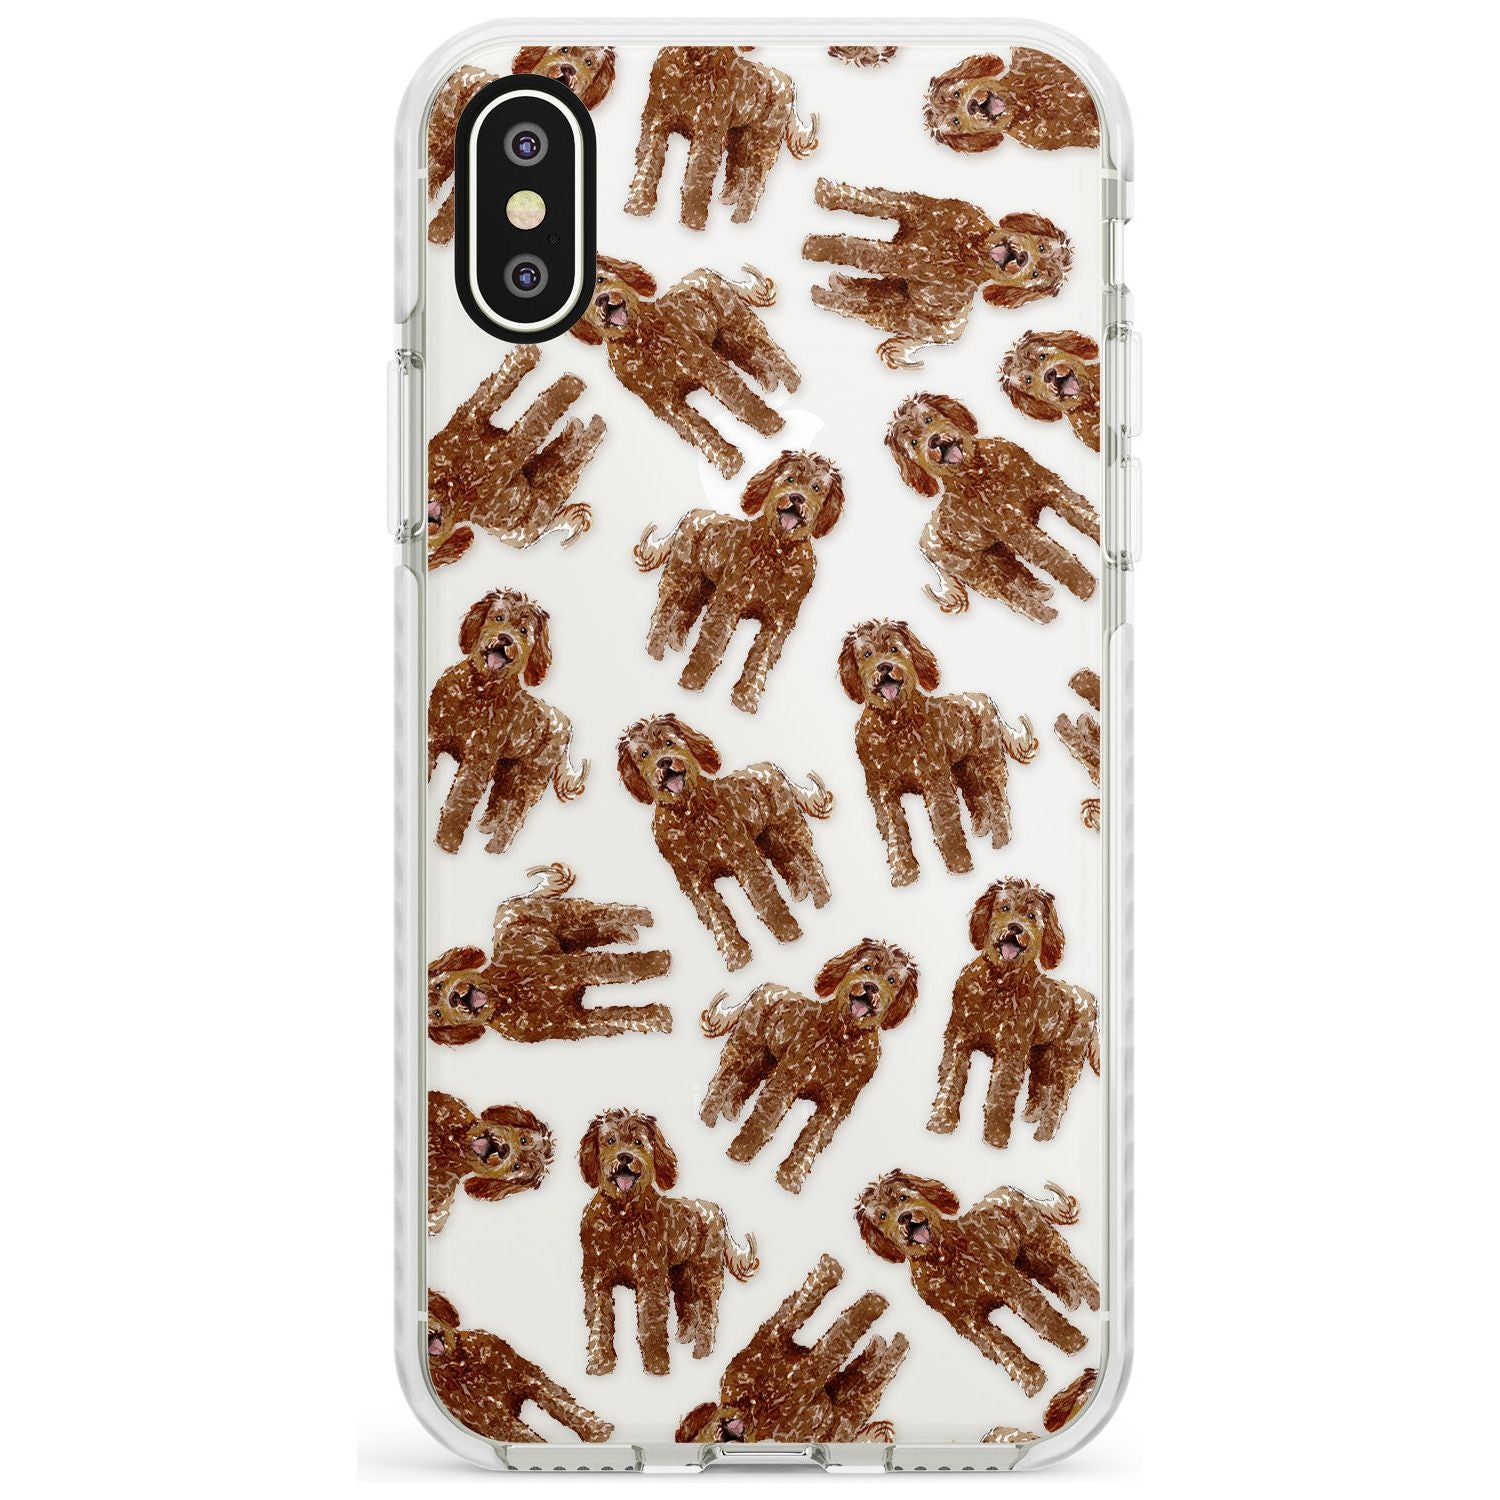 Labradoodle (Brown) Watercolour Dog Pattern Impact Phone Case for iPhone X XS Max XR